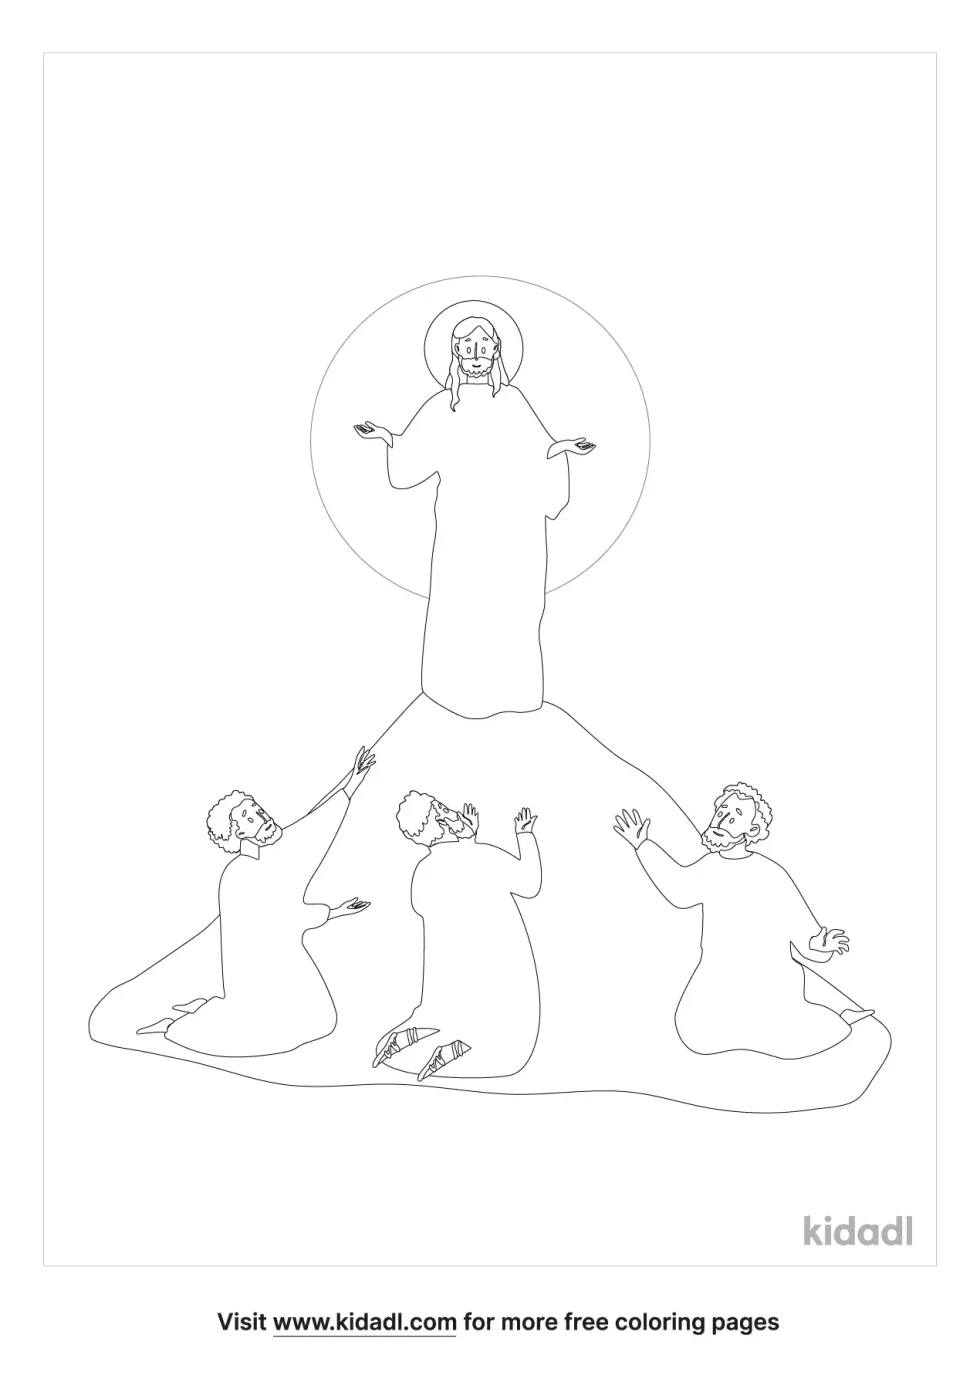 Transfiguration Coloring Page